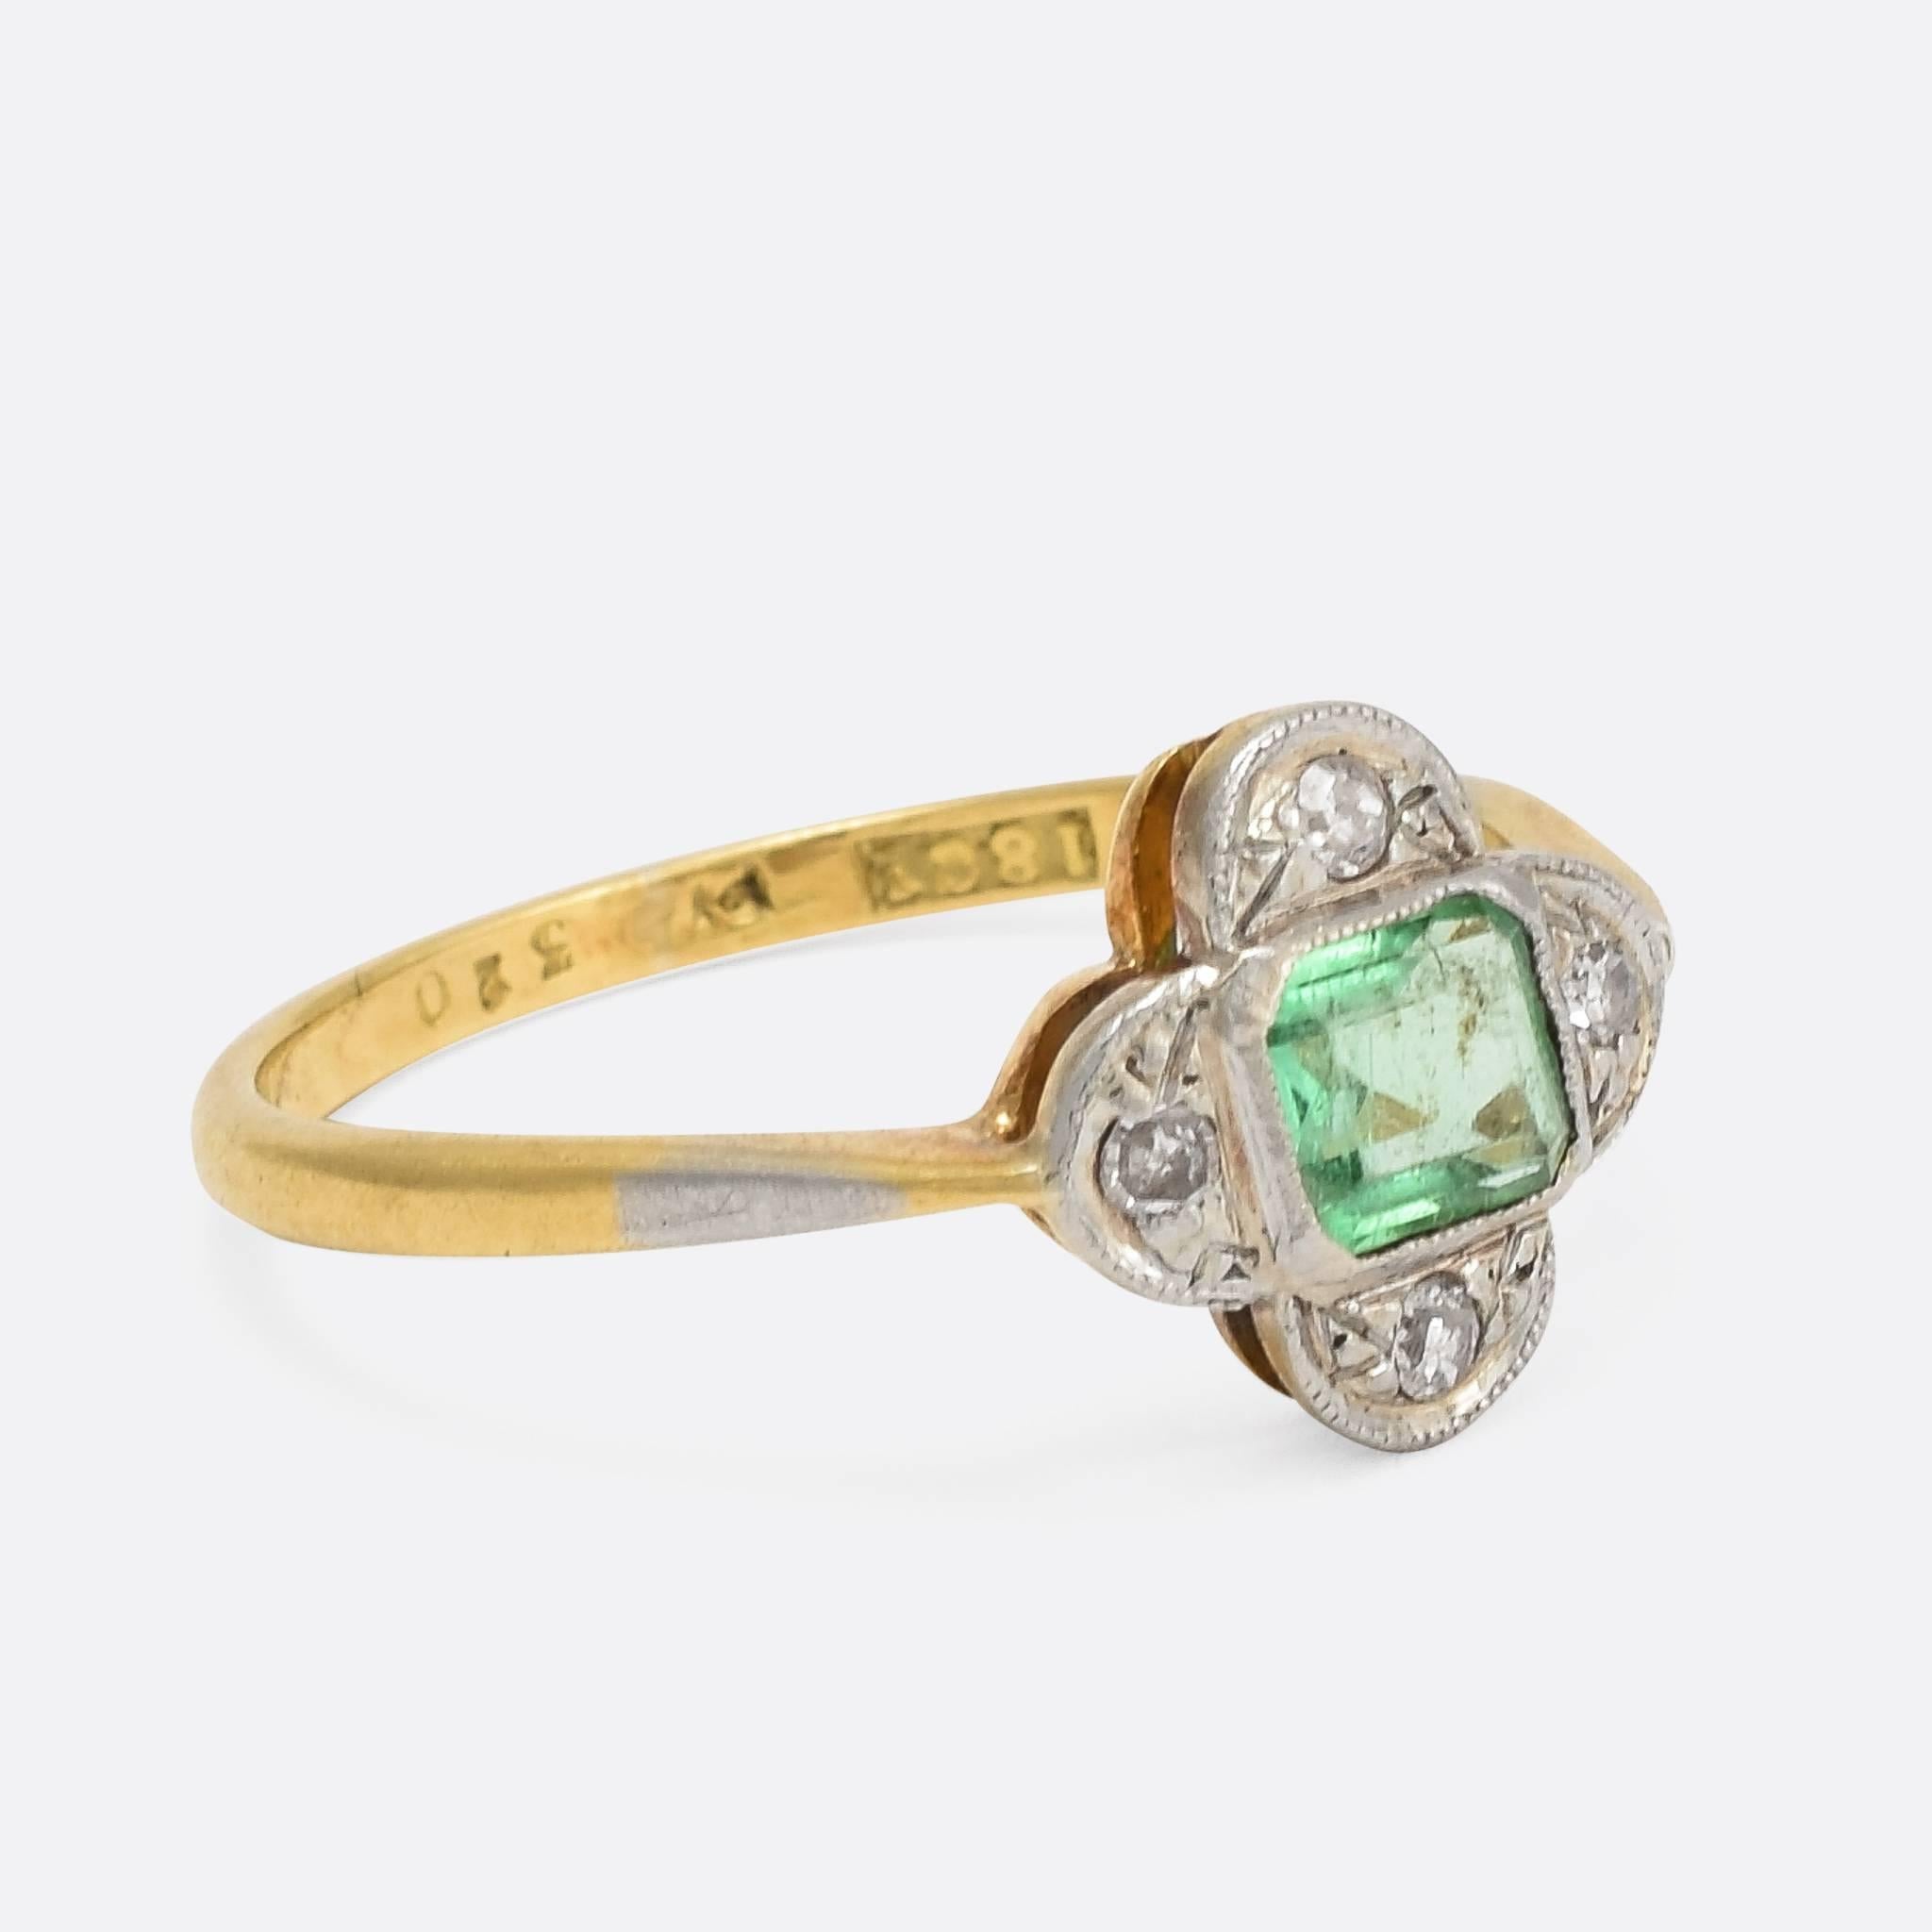 This stylish emerald and diamond cluster ring dates to the early Art Deco period, c.1920. It's modelled in 18ct yellow gold and platinum, with an attractive quatrefoil head finished in fine millegrain detail. The natural emerald is of a particularly